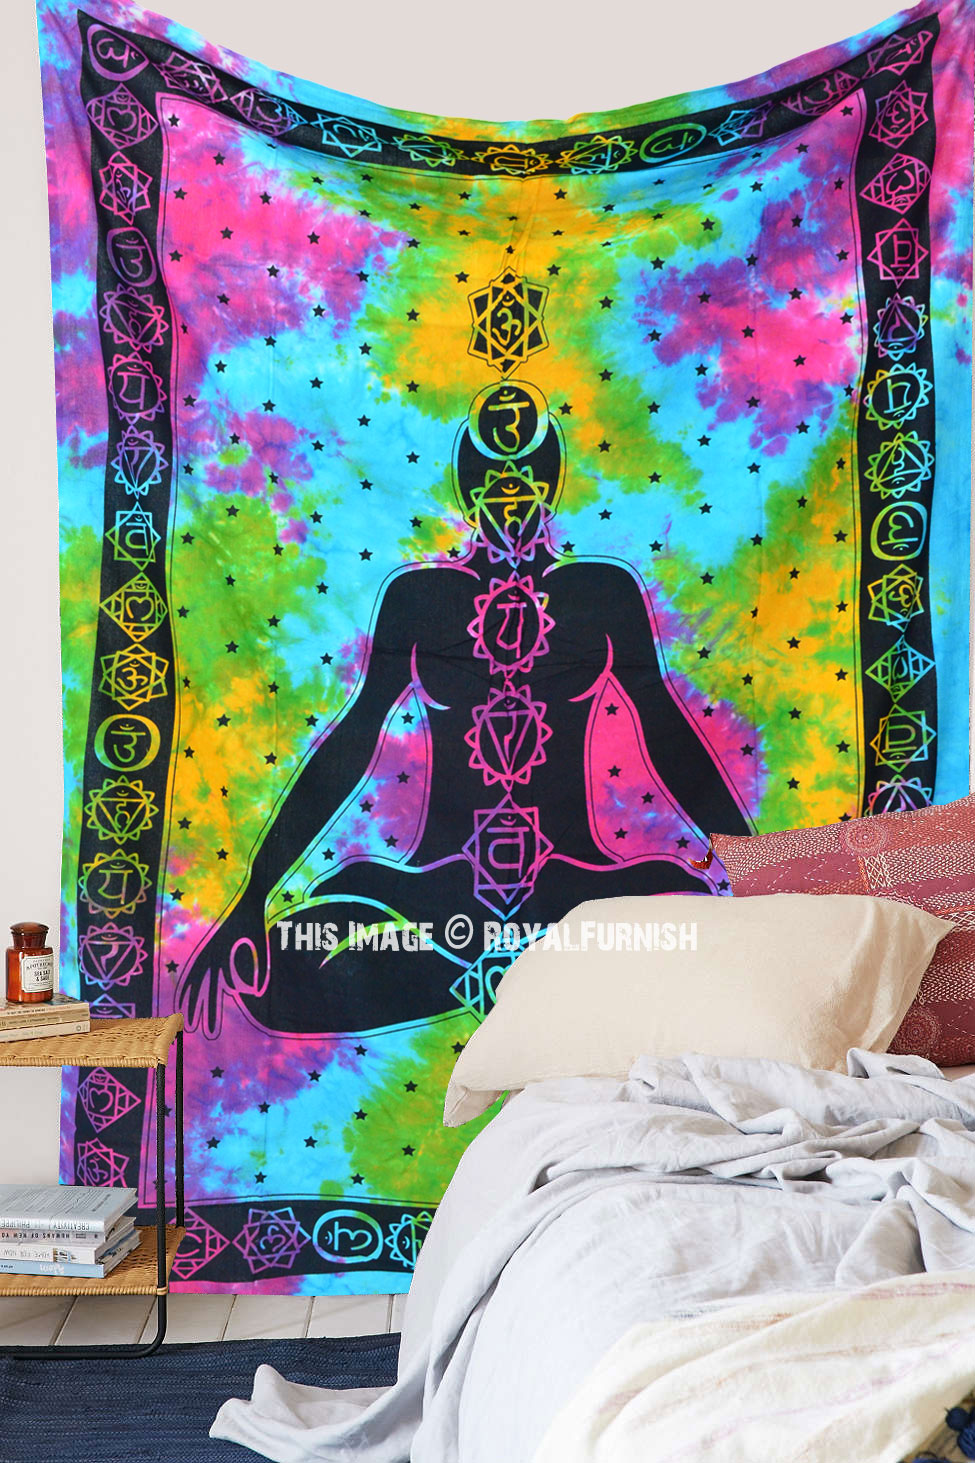 Seven Chakra Buddha Yoga Meditation Studio Room Decorations Tie Dye Hippie Psychedelic Small Tapestry Poster 40x30 inches 7 Chakras Tapestries Meditating Peace Wall Art Hanging Decor